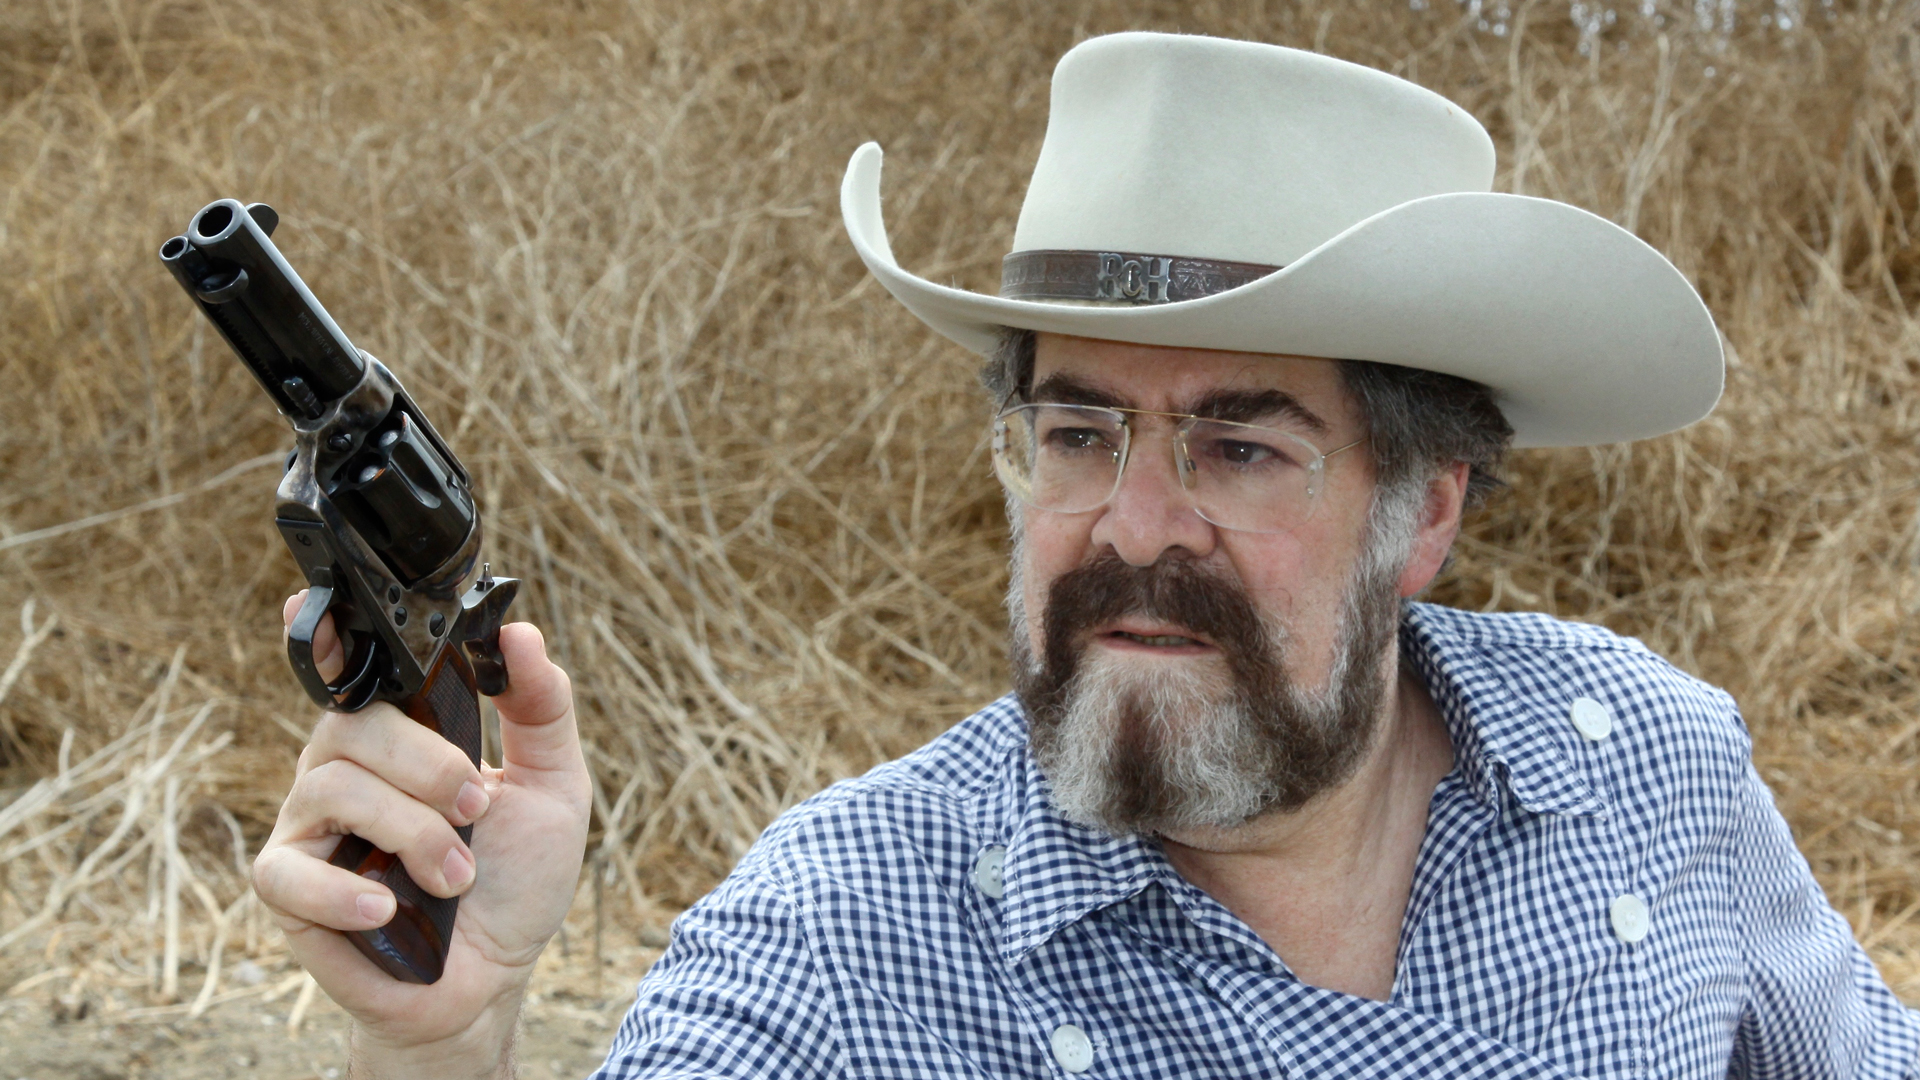 Author Rick Hacker in the field with cowboy hat and single-action revolver in hand